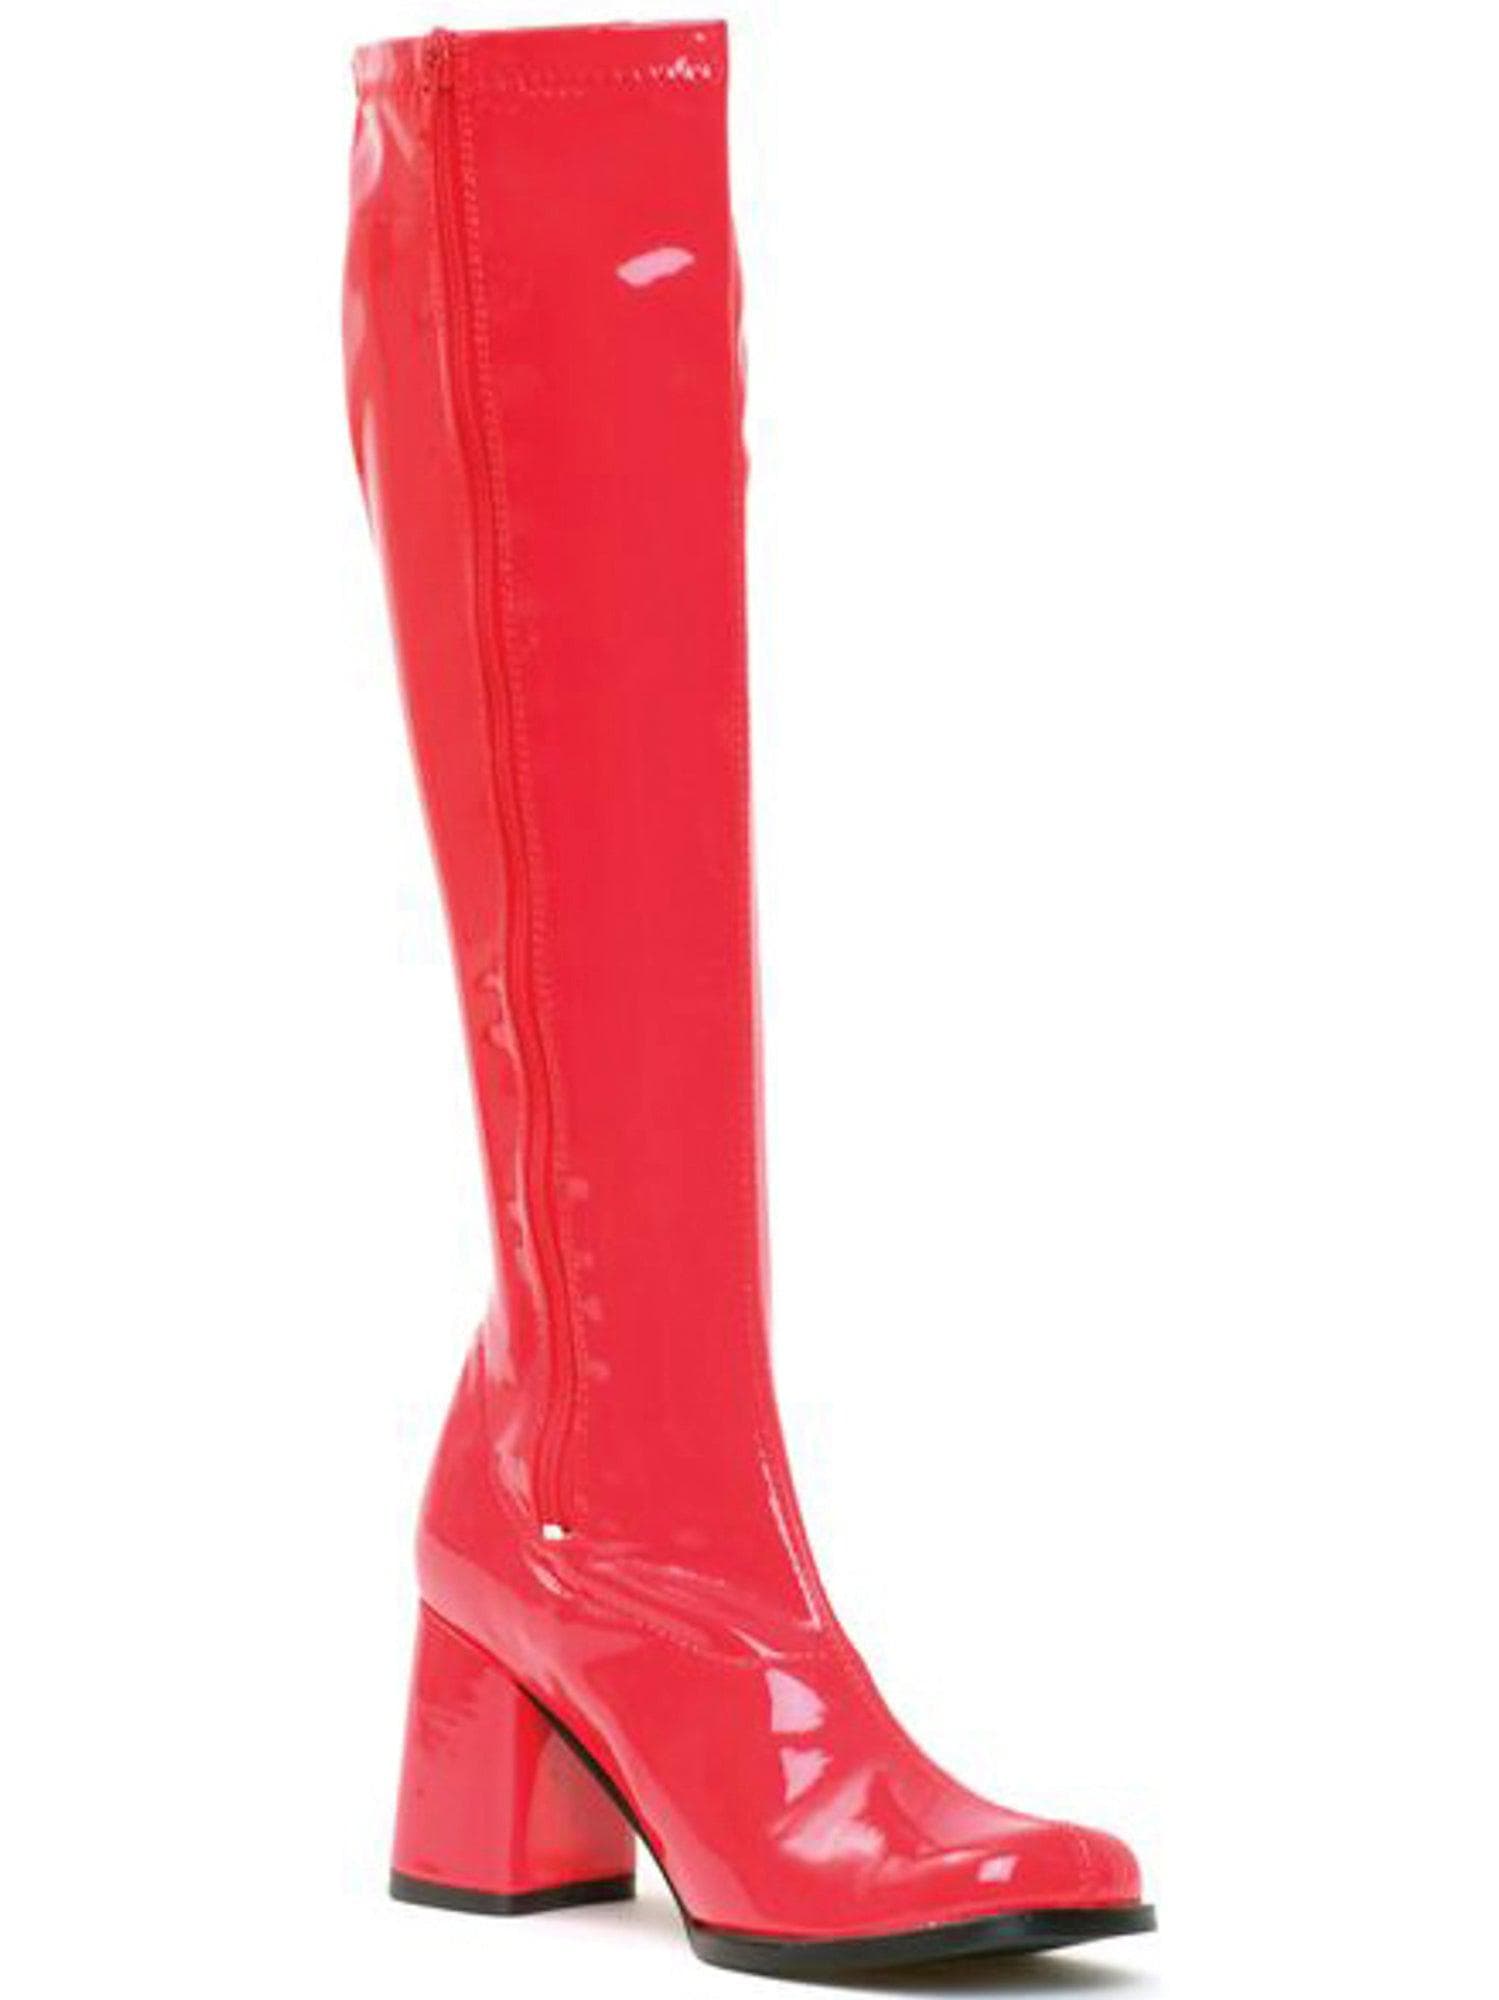 Adult Red Patent Go Go Boots - costumes.com